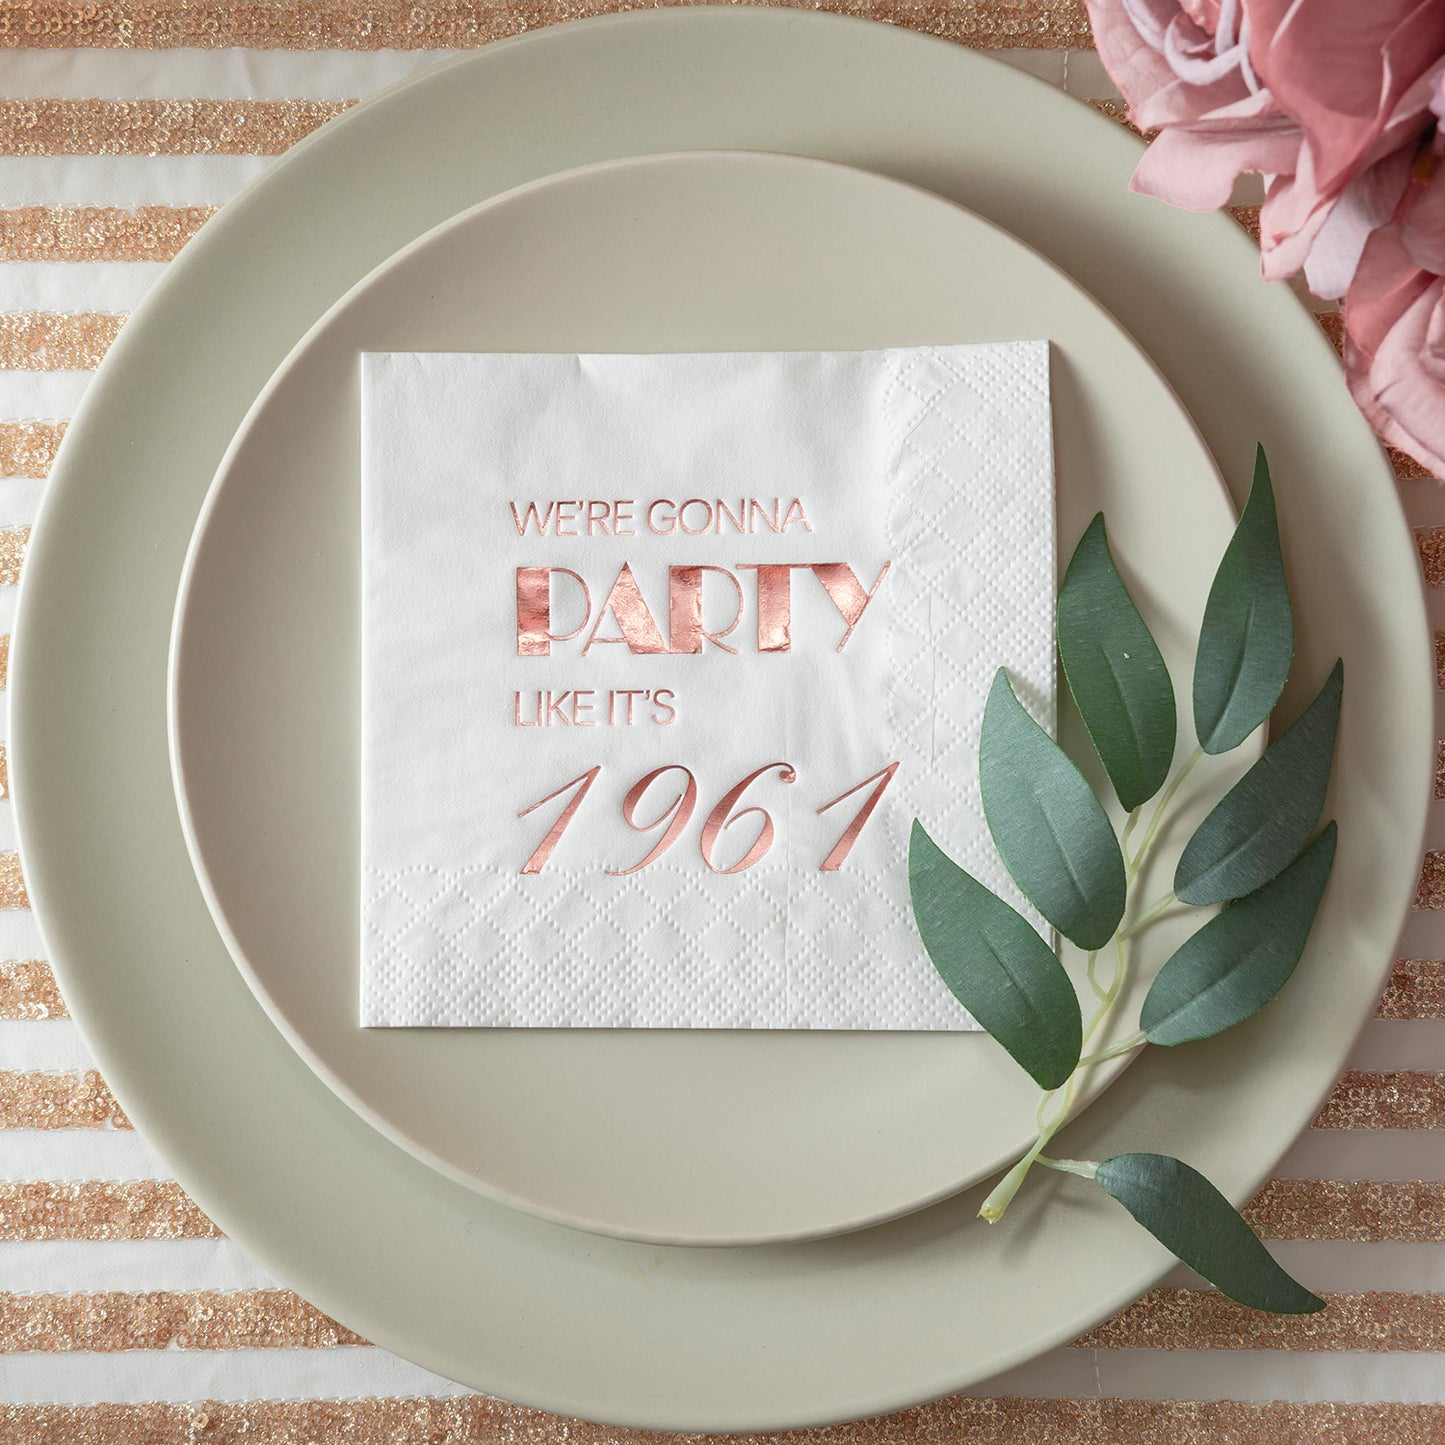 Crisky 60th Birthday Cocktail Napkins Rose Gold for Women 60th Birthday Party Decorations for Cake Dessert Berverage Table, 60th Birthday Party Supplies,50 Pcs Disposable Napkins, 3-Ply